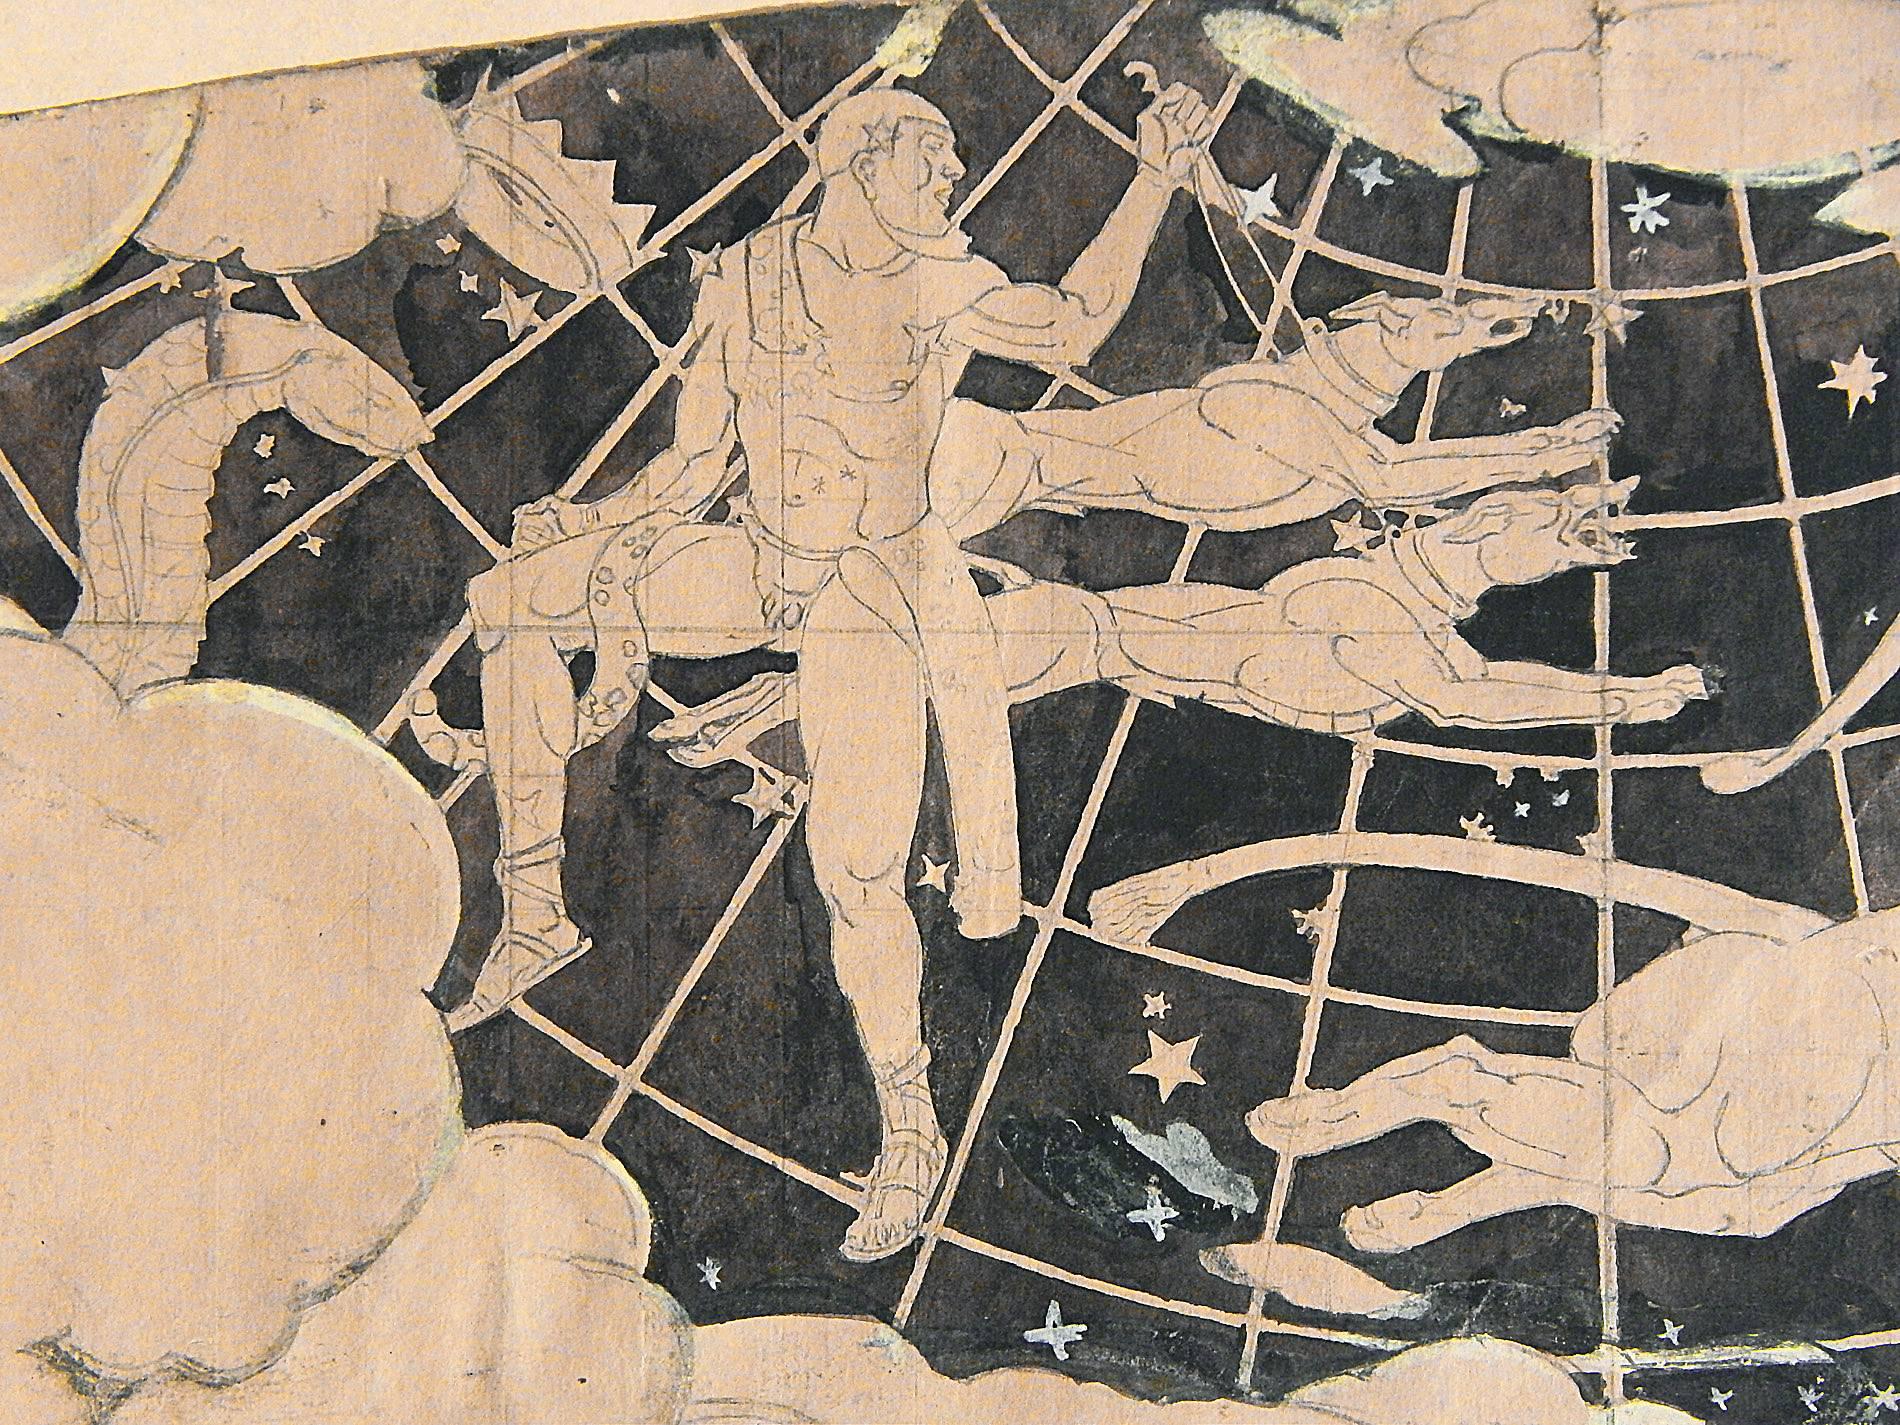 Painted by the renowned muralist, Barry Faulkner, in 1929 for the ceiling of the Horace Bushnell Memorial Hall in Hartford, Connecticut, this remarkable Art Deco study depicts Canes Venatici, or the Herdsman holding two hounds, Asterion and Chara,